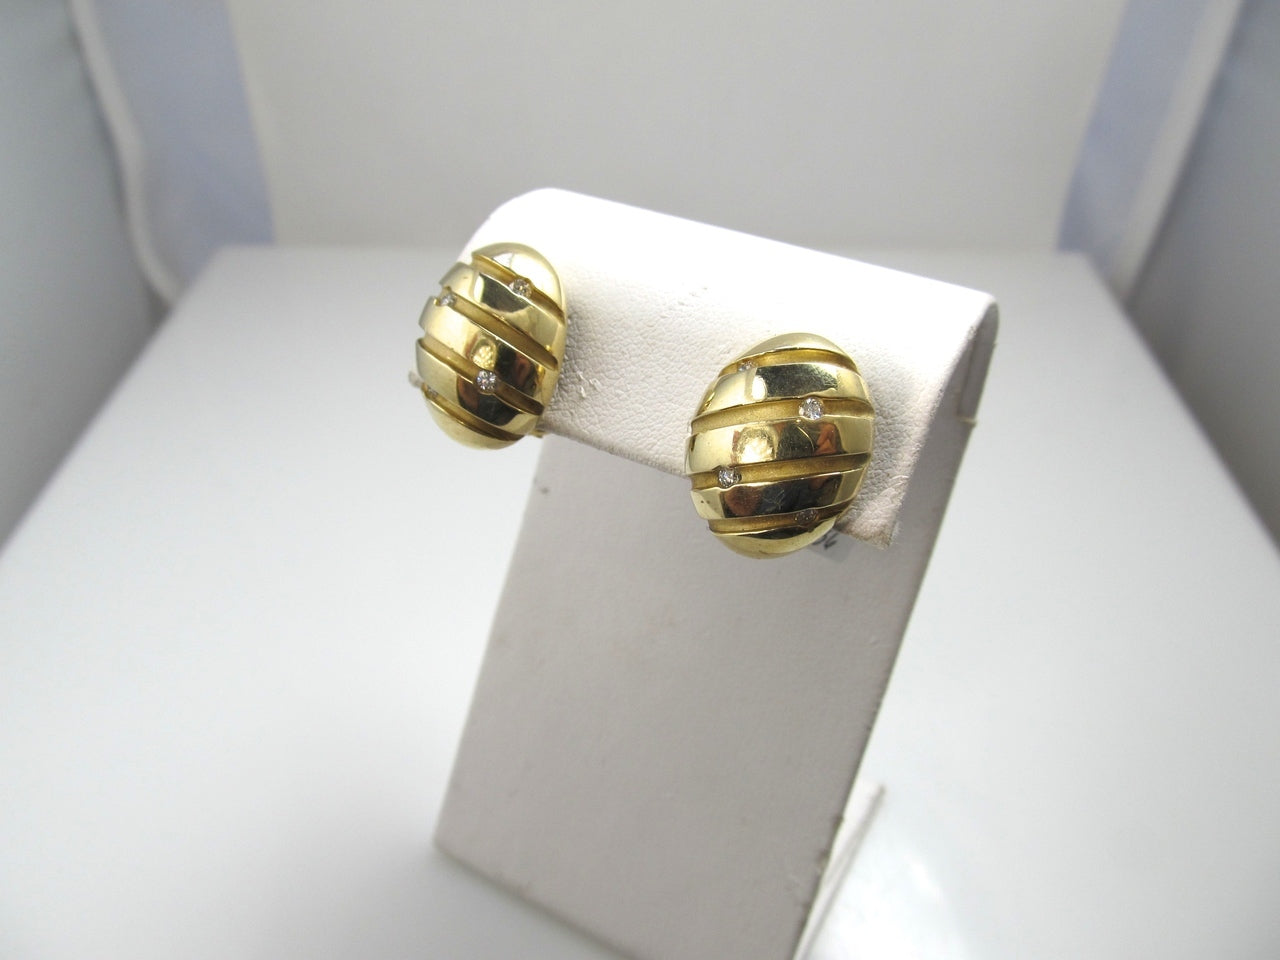 Modernist Estate 18k Yellow Gold Earrings With Diamonds